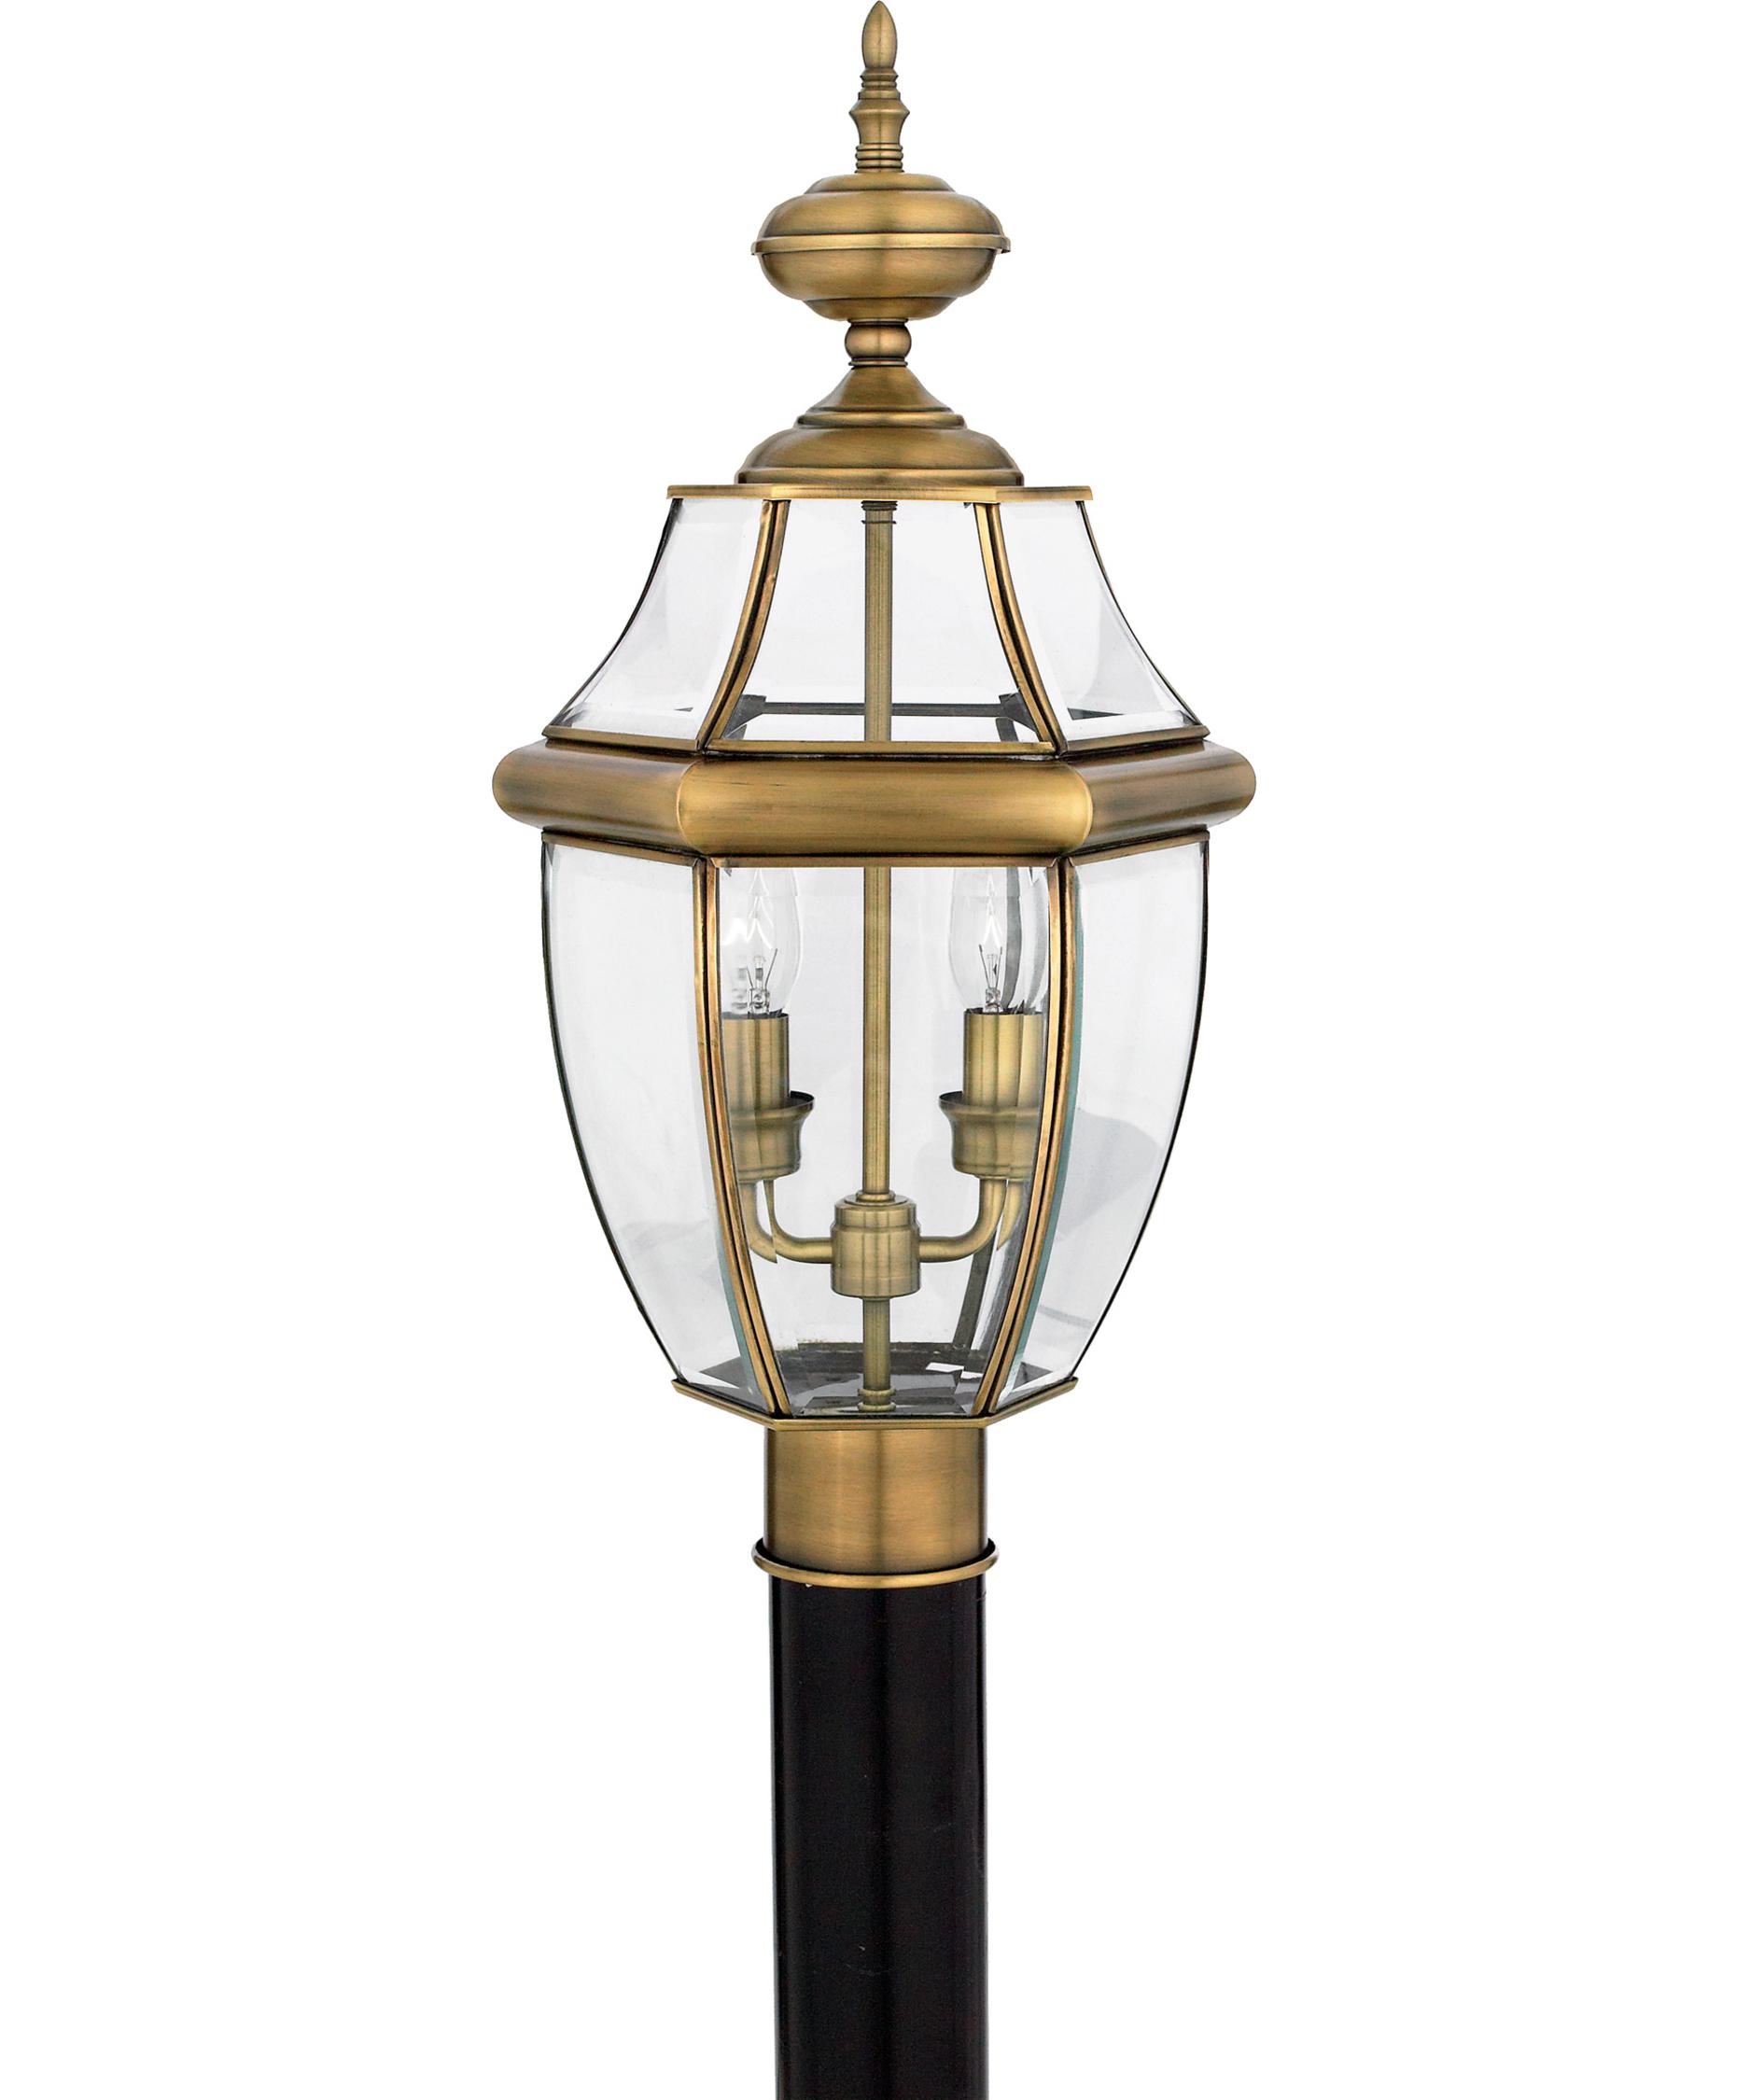 Quoizel NY9042 Newbury 11 Inch Wide 2 Light Outdoor Post Lamp ...